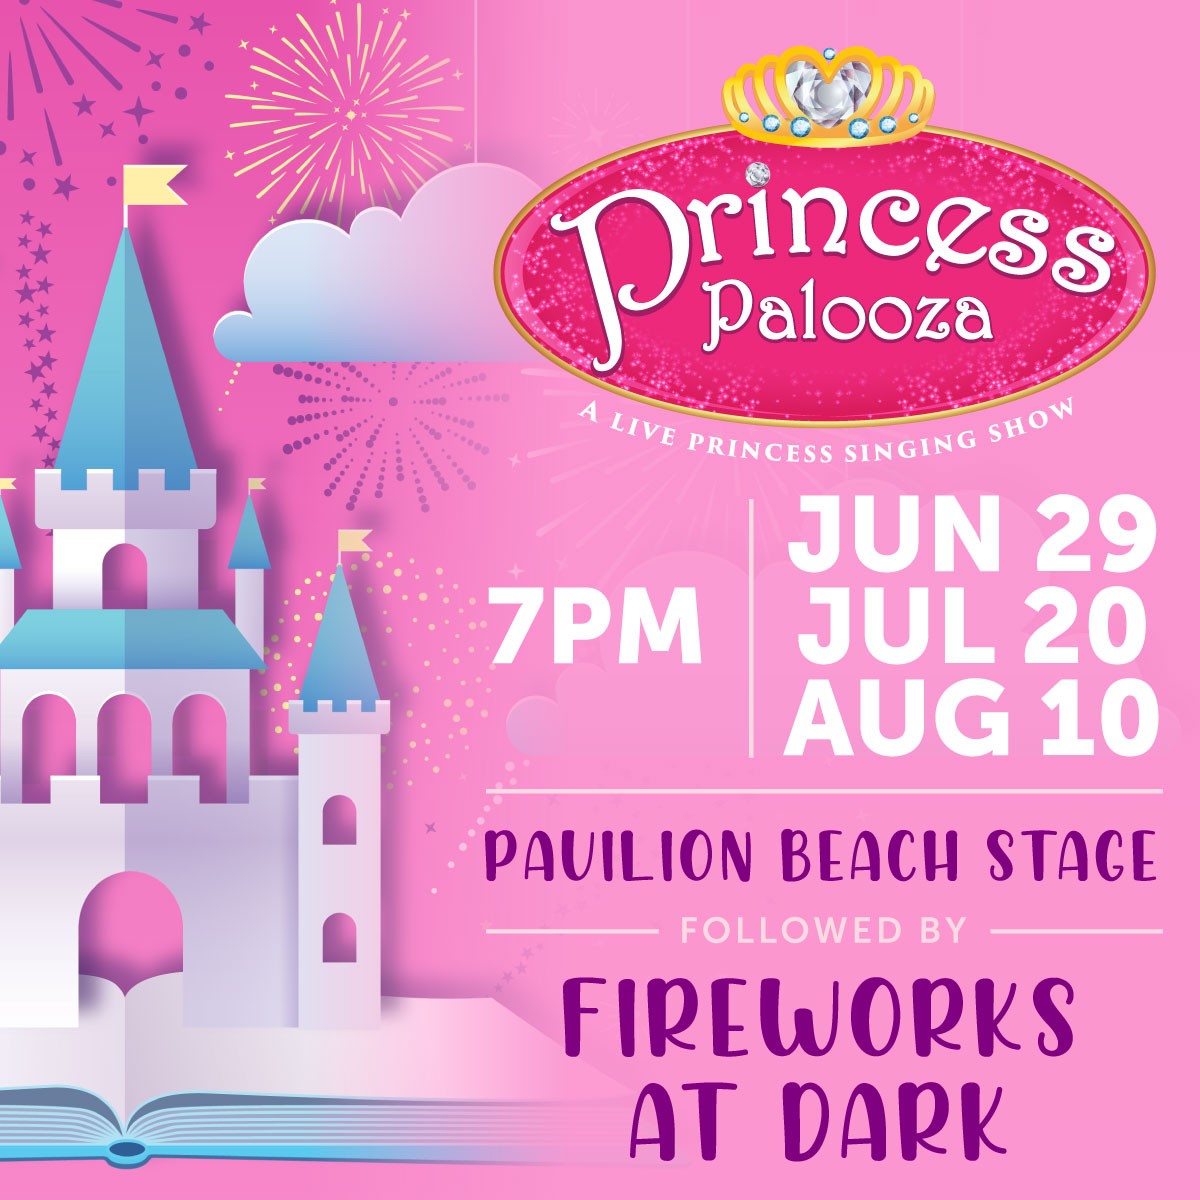 jenkinson's boardwalk princess palooza shows on june 29th, july 20th and august 10th at 7pm on the pavilion beach stage followed by fireworks at dark